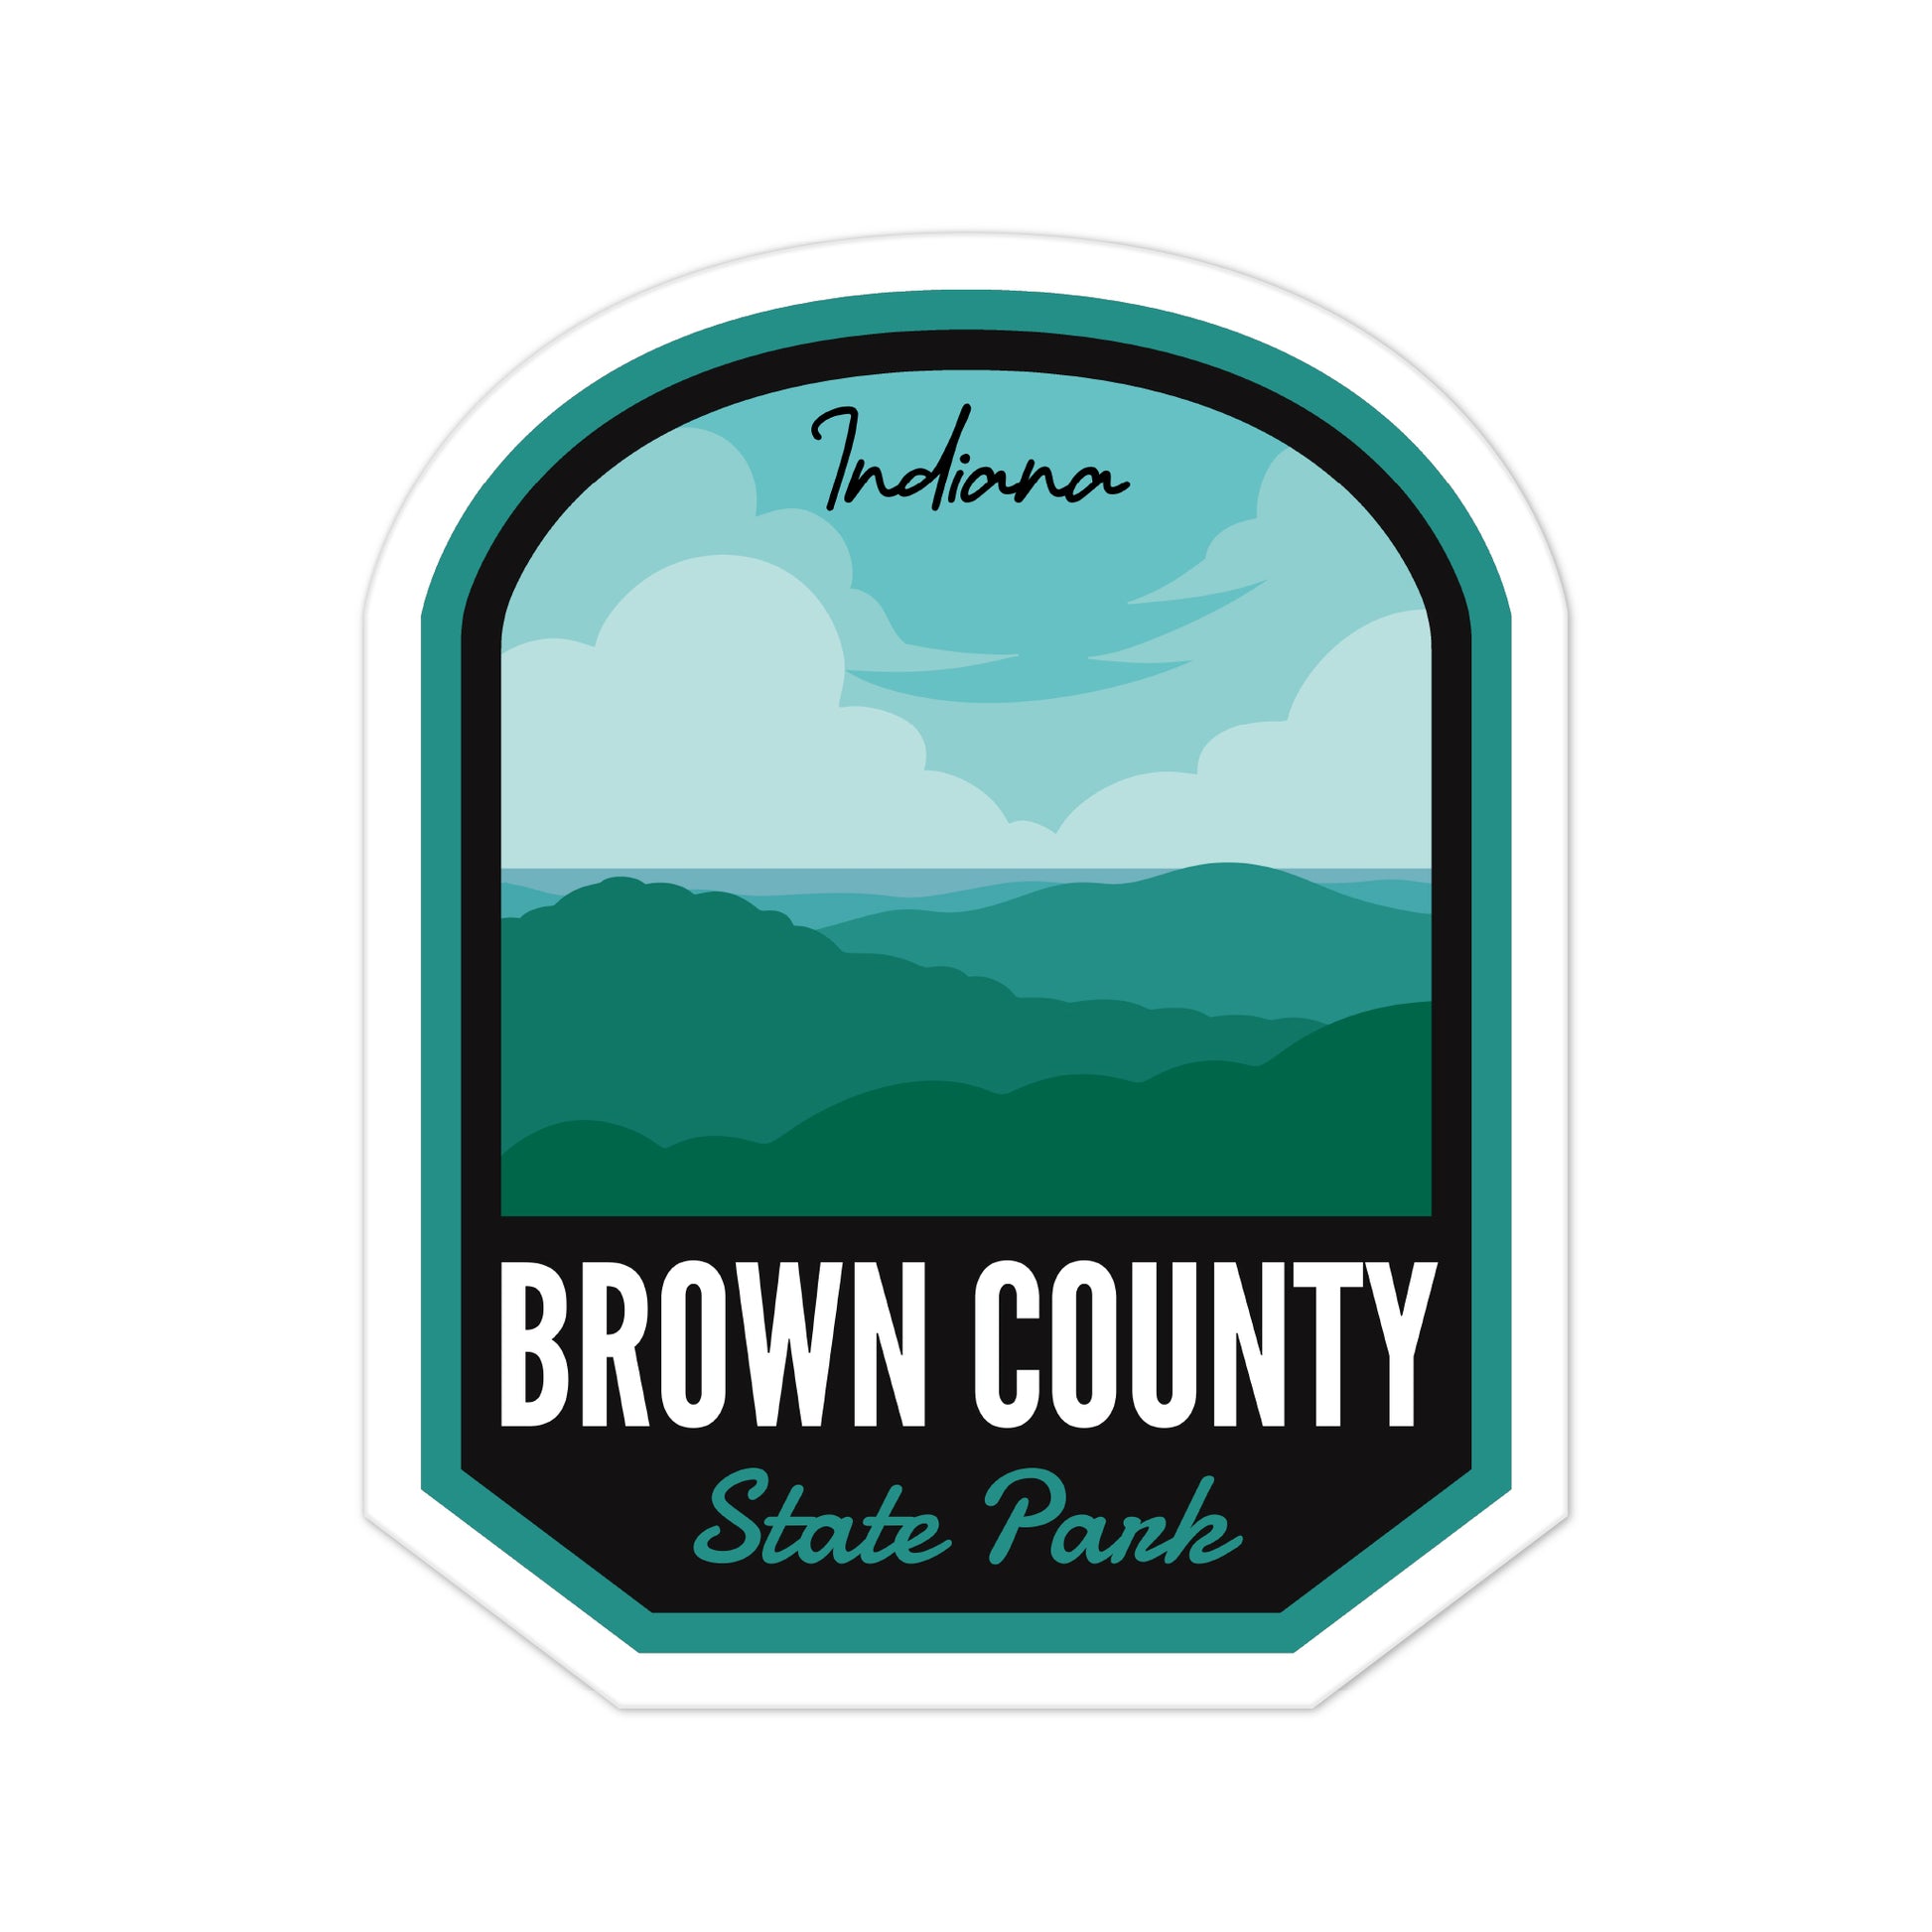 A sticker of Brown County State Park